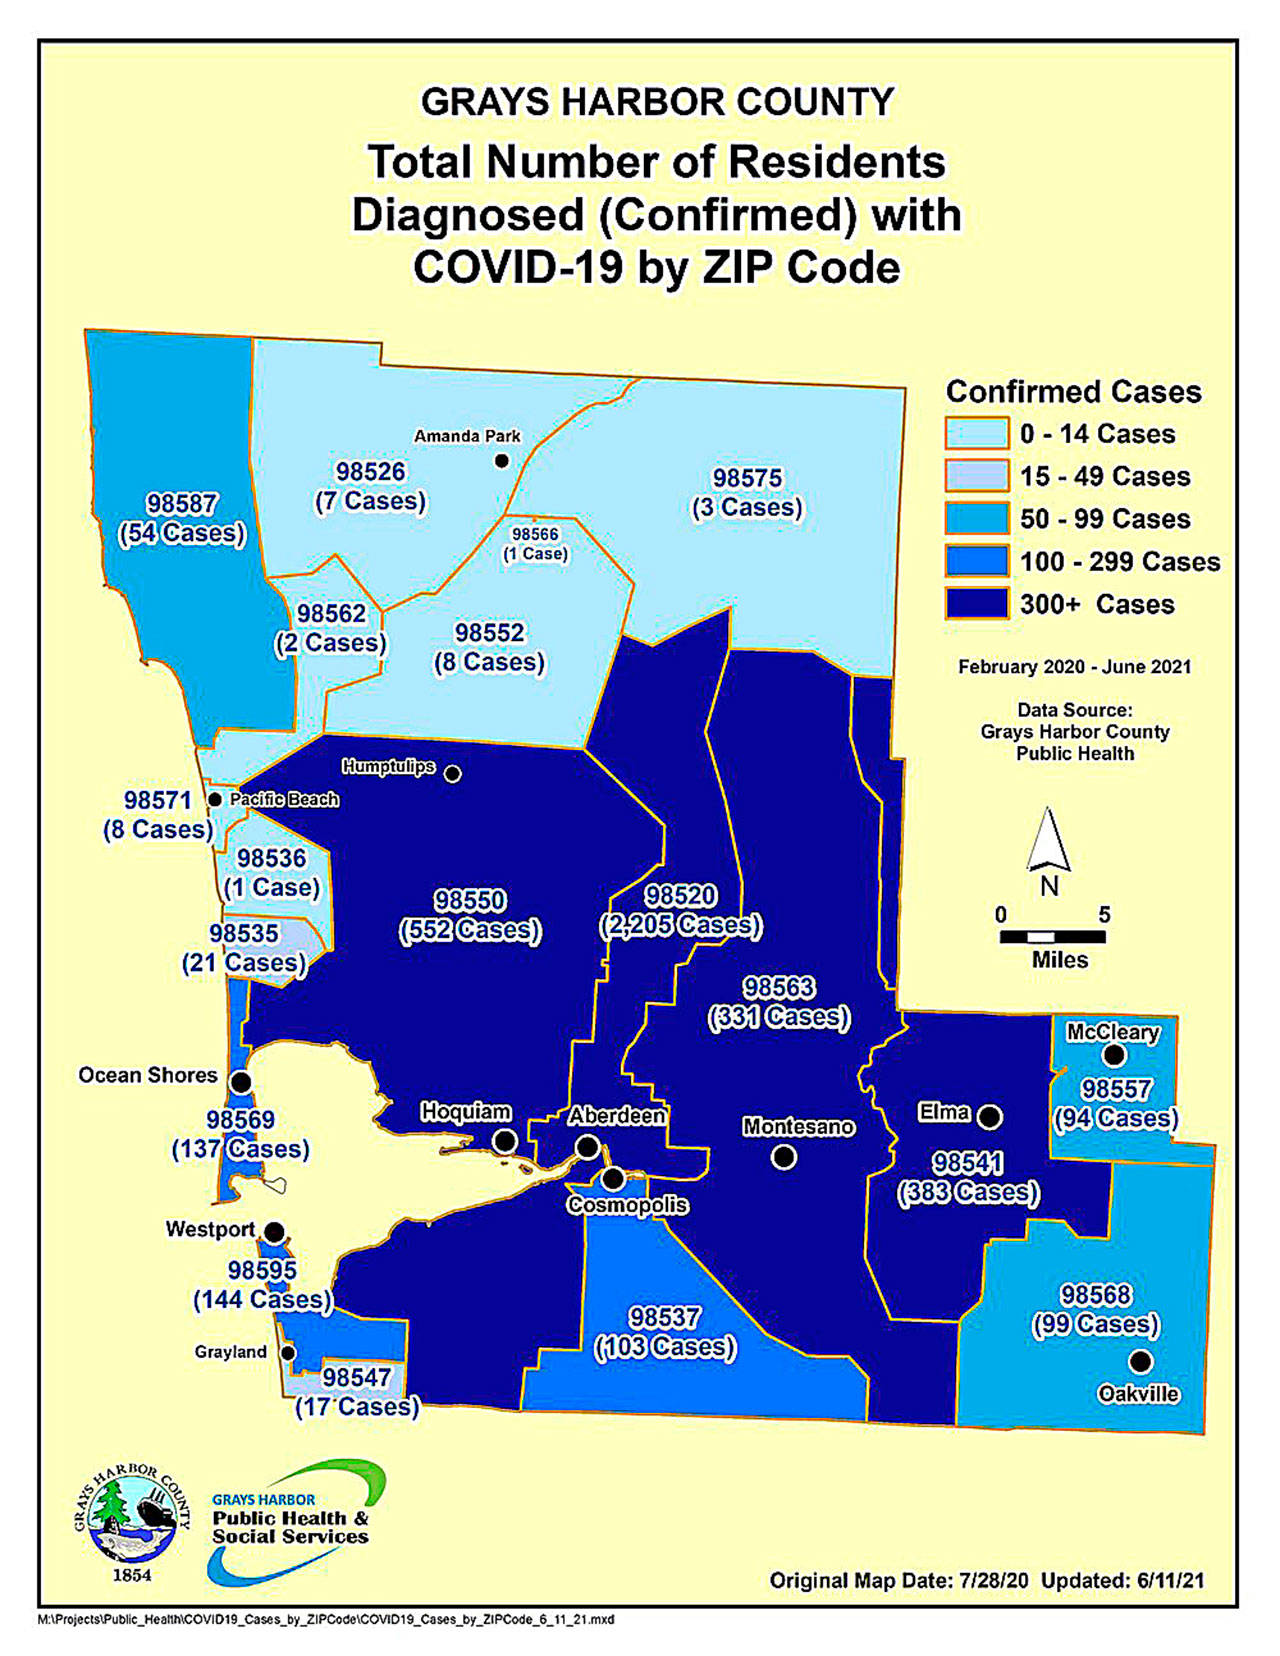 COVID-19 cases by zip code in Grays Harbor County updated Friday, June 11. (Courtesy Grays Harbor County Public Health)